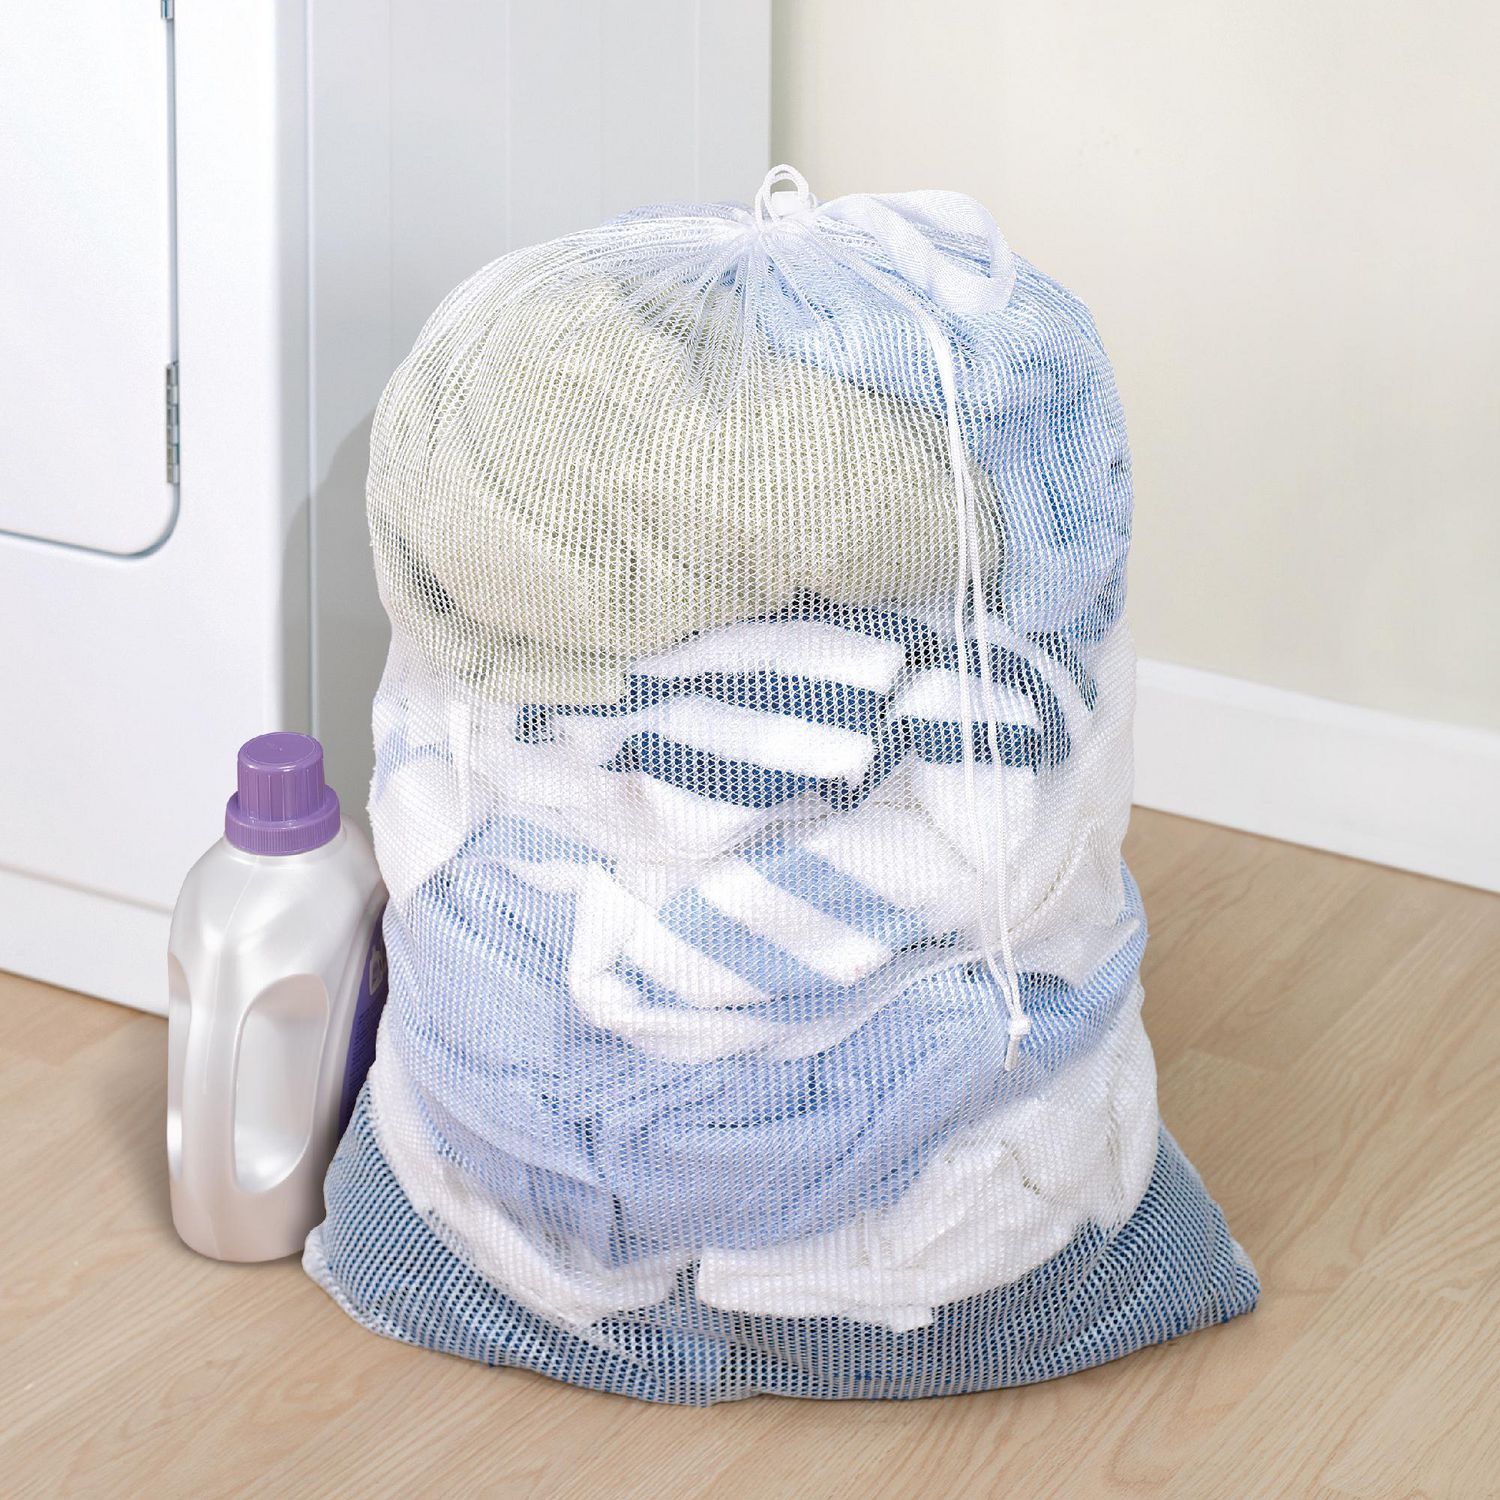 Essentials Large Mesh Laundry Bag with Push Lock Drawstring 36in x 24in   Amazonin Home  Kitchen